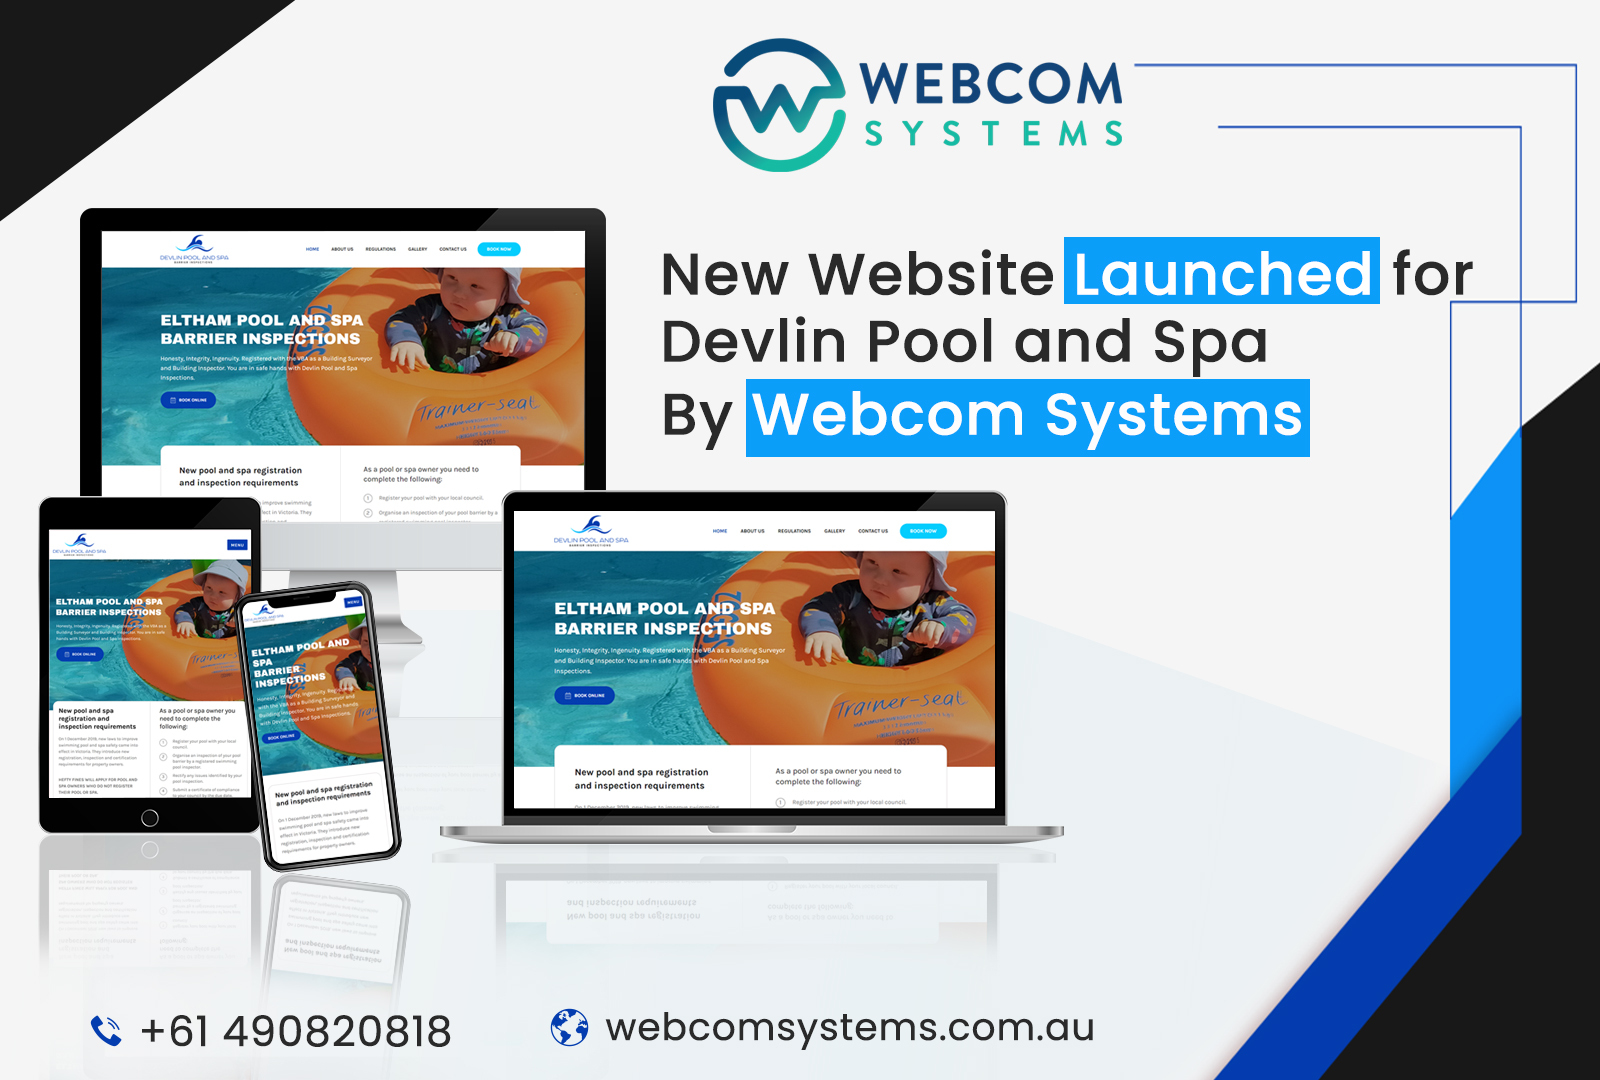 New Website Launched For Devlin Pool and Spa Inspection By Webcom Systems